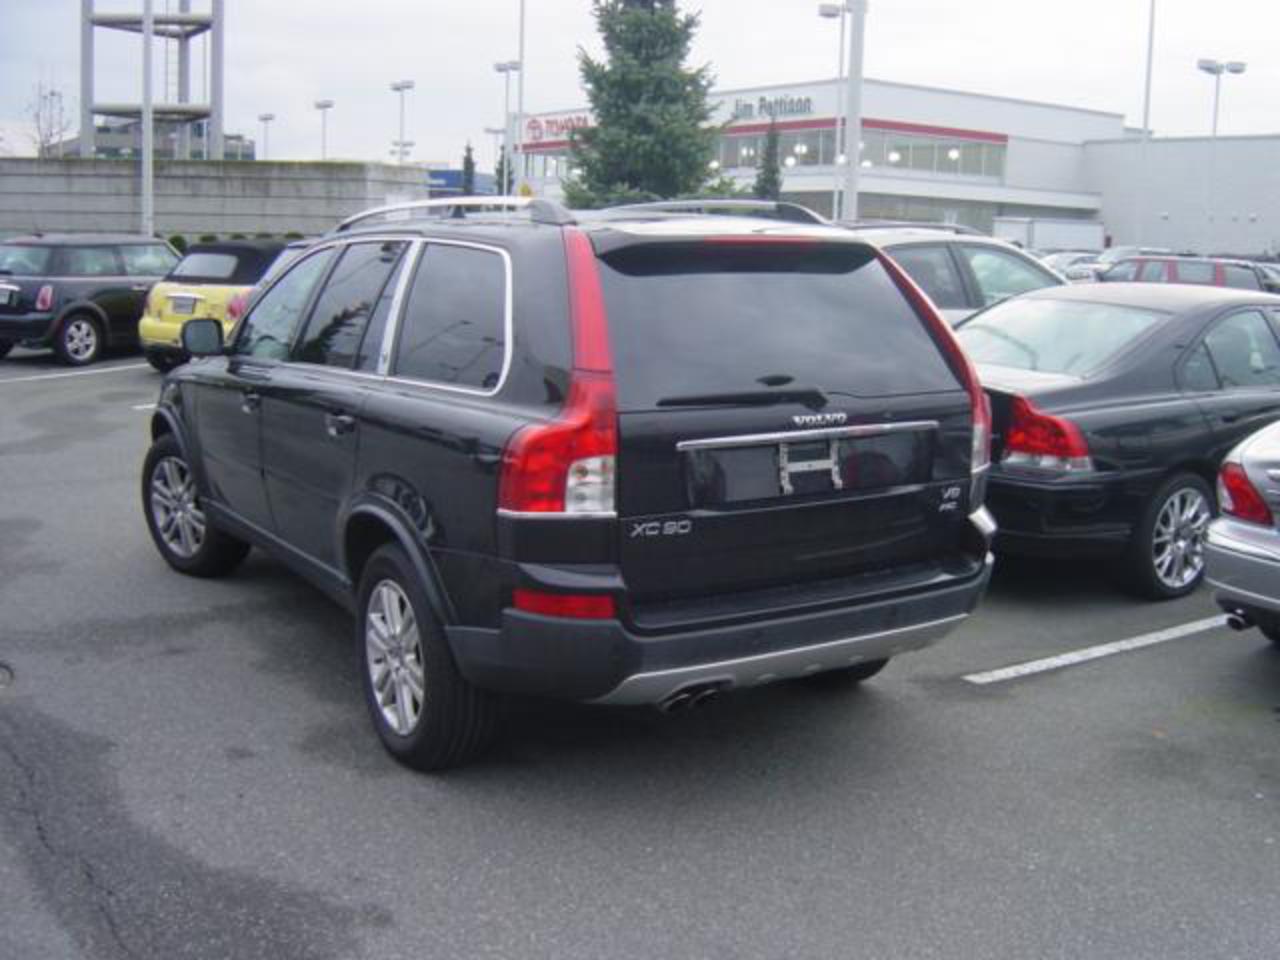 Volvo XC90 V8 Executive. View Download Wallpaper. 640x480. Comments